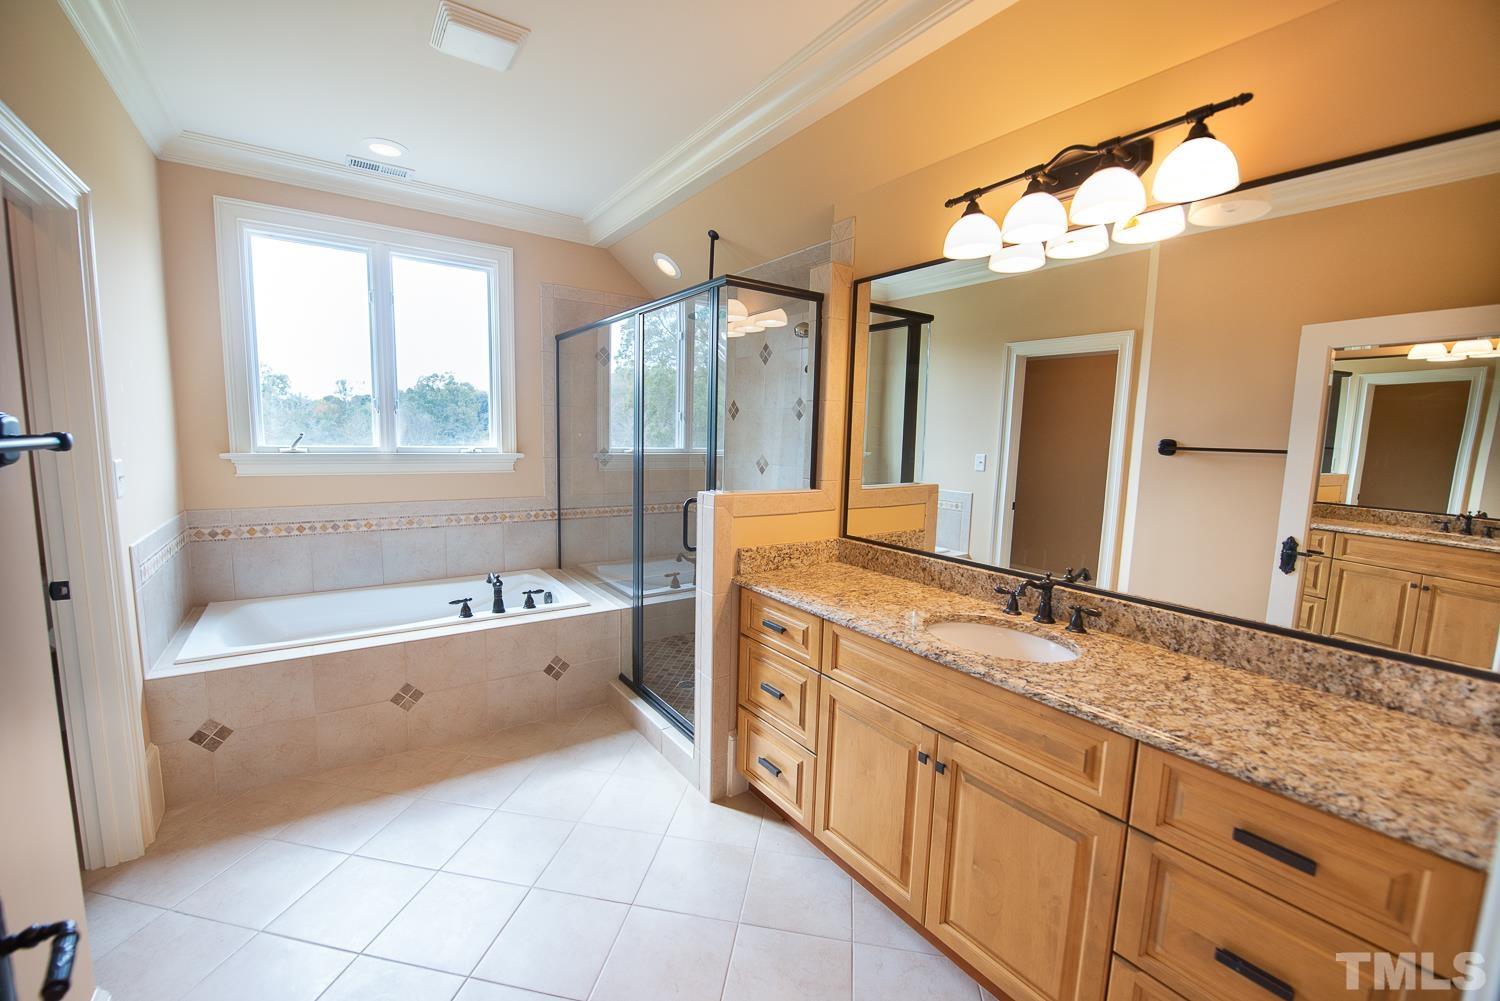 Has large granite vanity with upgraded ogee edge, separate tiled shower with rain shower head, tub and tiled flooring.